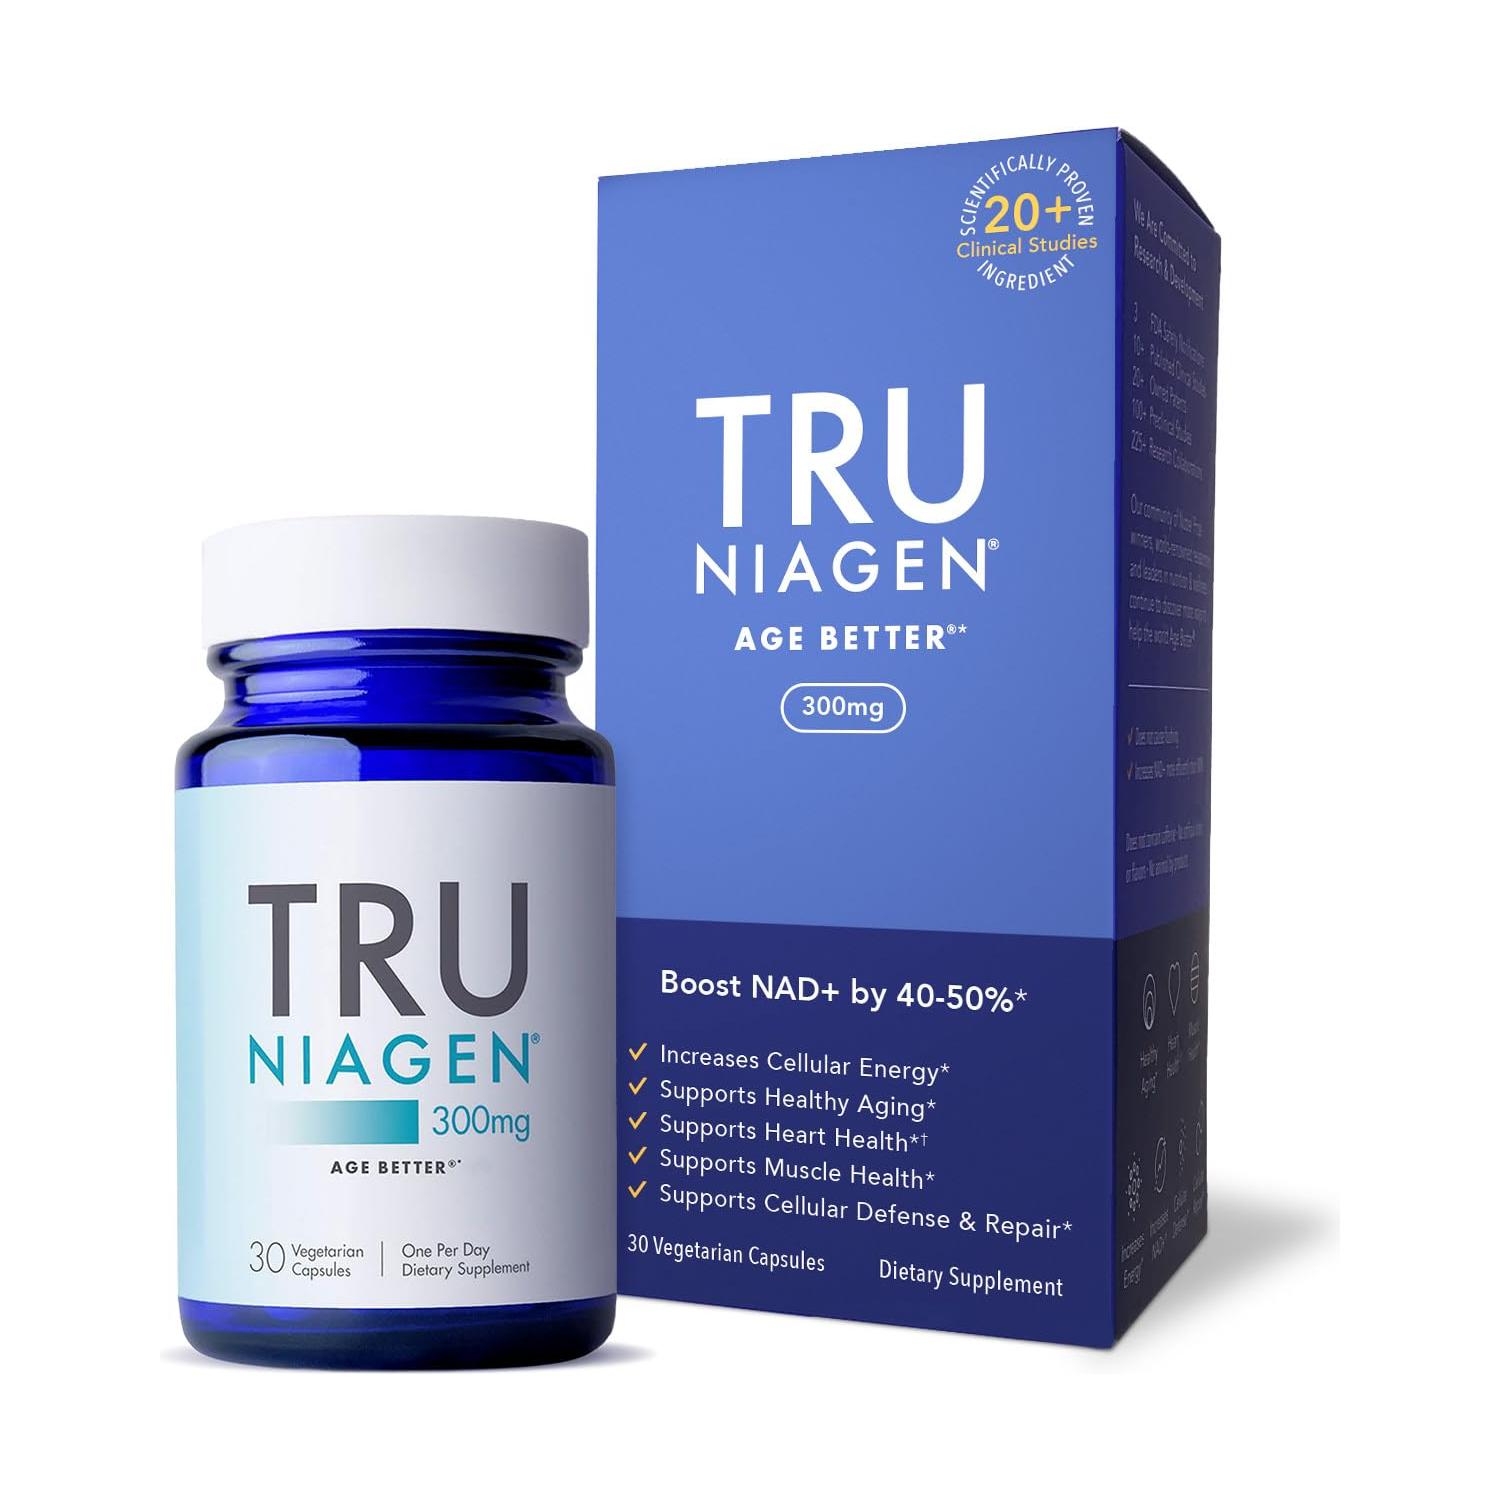 TRU NIAGEN - Patented Nicotinamide Riboside NAD+ Supplement. NR Supports Cellular Energy Metabolism &amp; Repair, Vitality, Healthy Aging of Heart, Brain &amp; Muscle - 30 Servings / 30 Capsules - Pack of 1